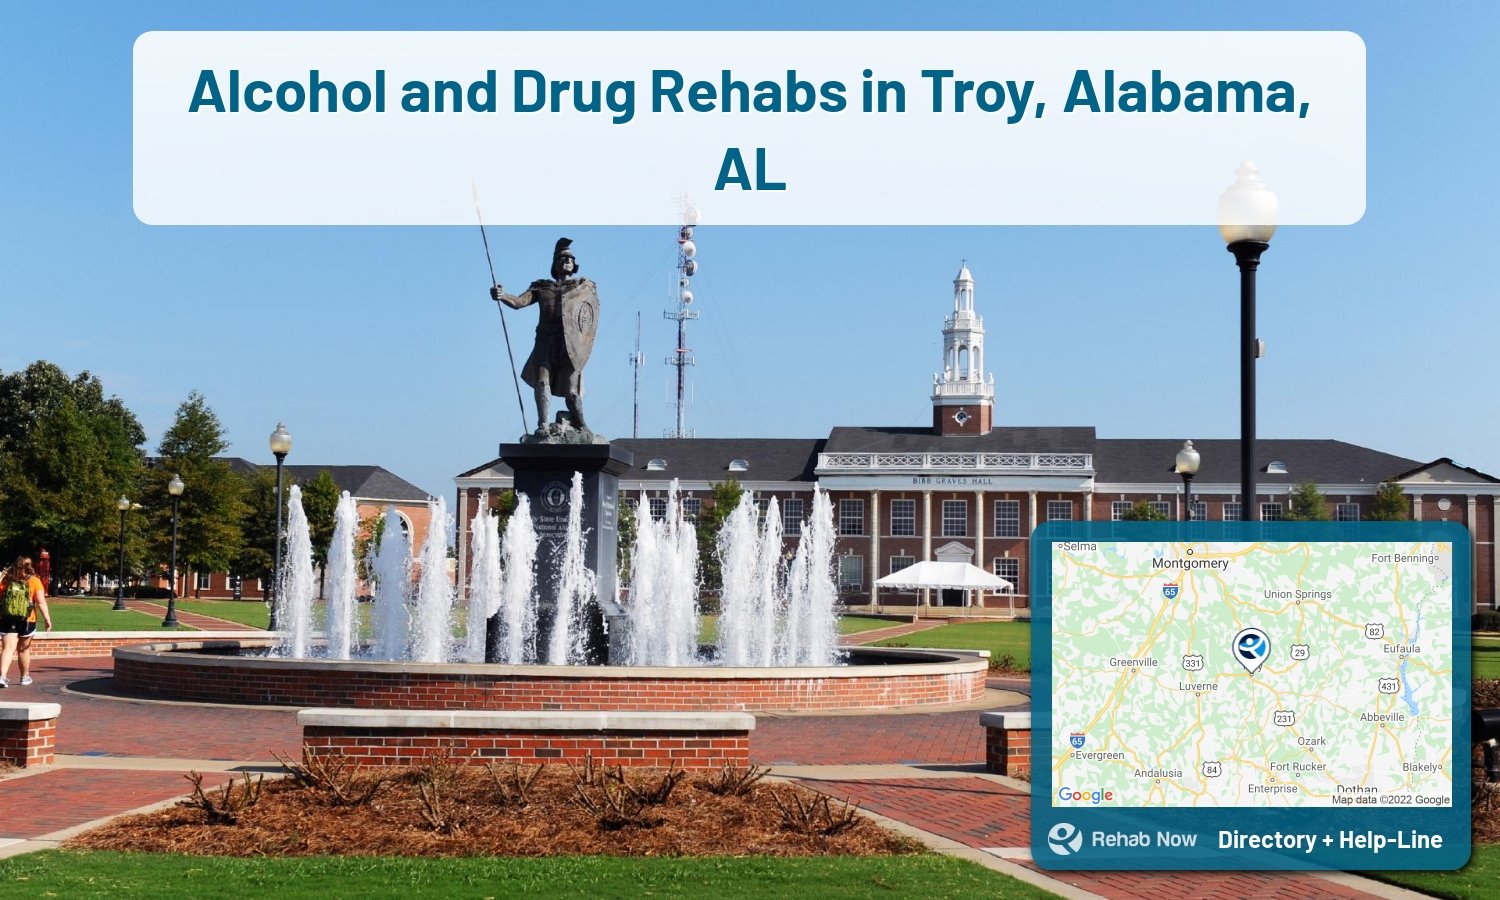 View options, availability, treatment methods, and more, for drug rehab and alcohol treatment in Troy, Alabama